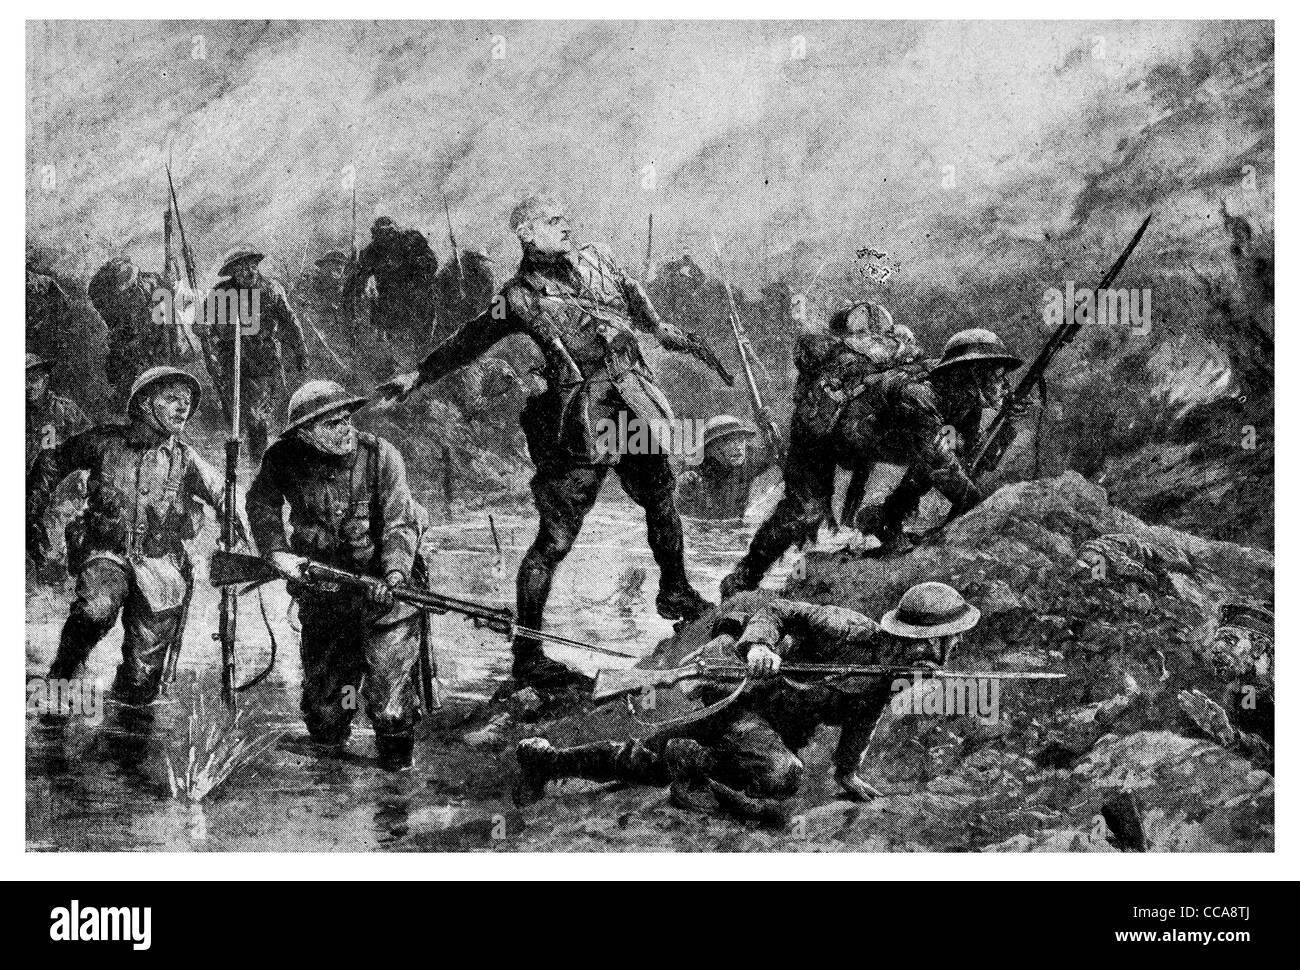 1917 Moonlight attack Battle of the Somme charge bayonet rifle swamp pistol officer front line action trench charging gun weapon Stock Photo